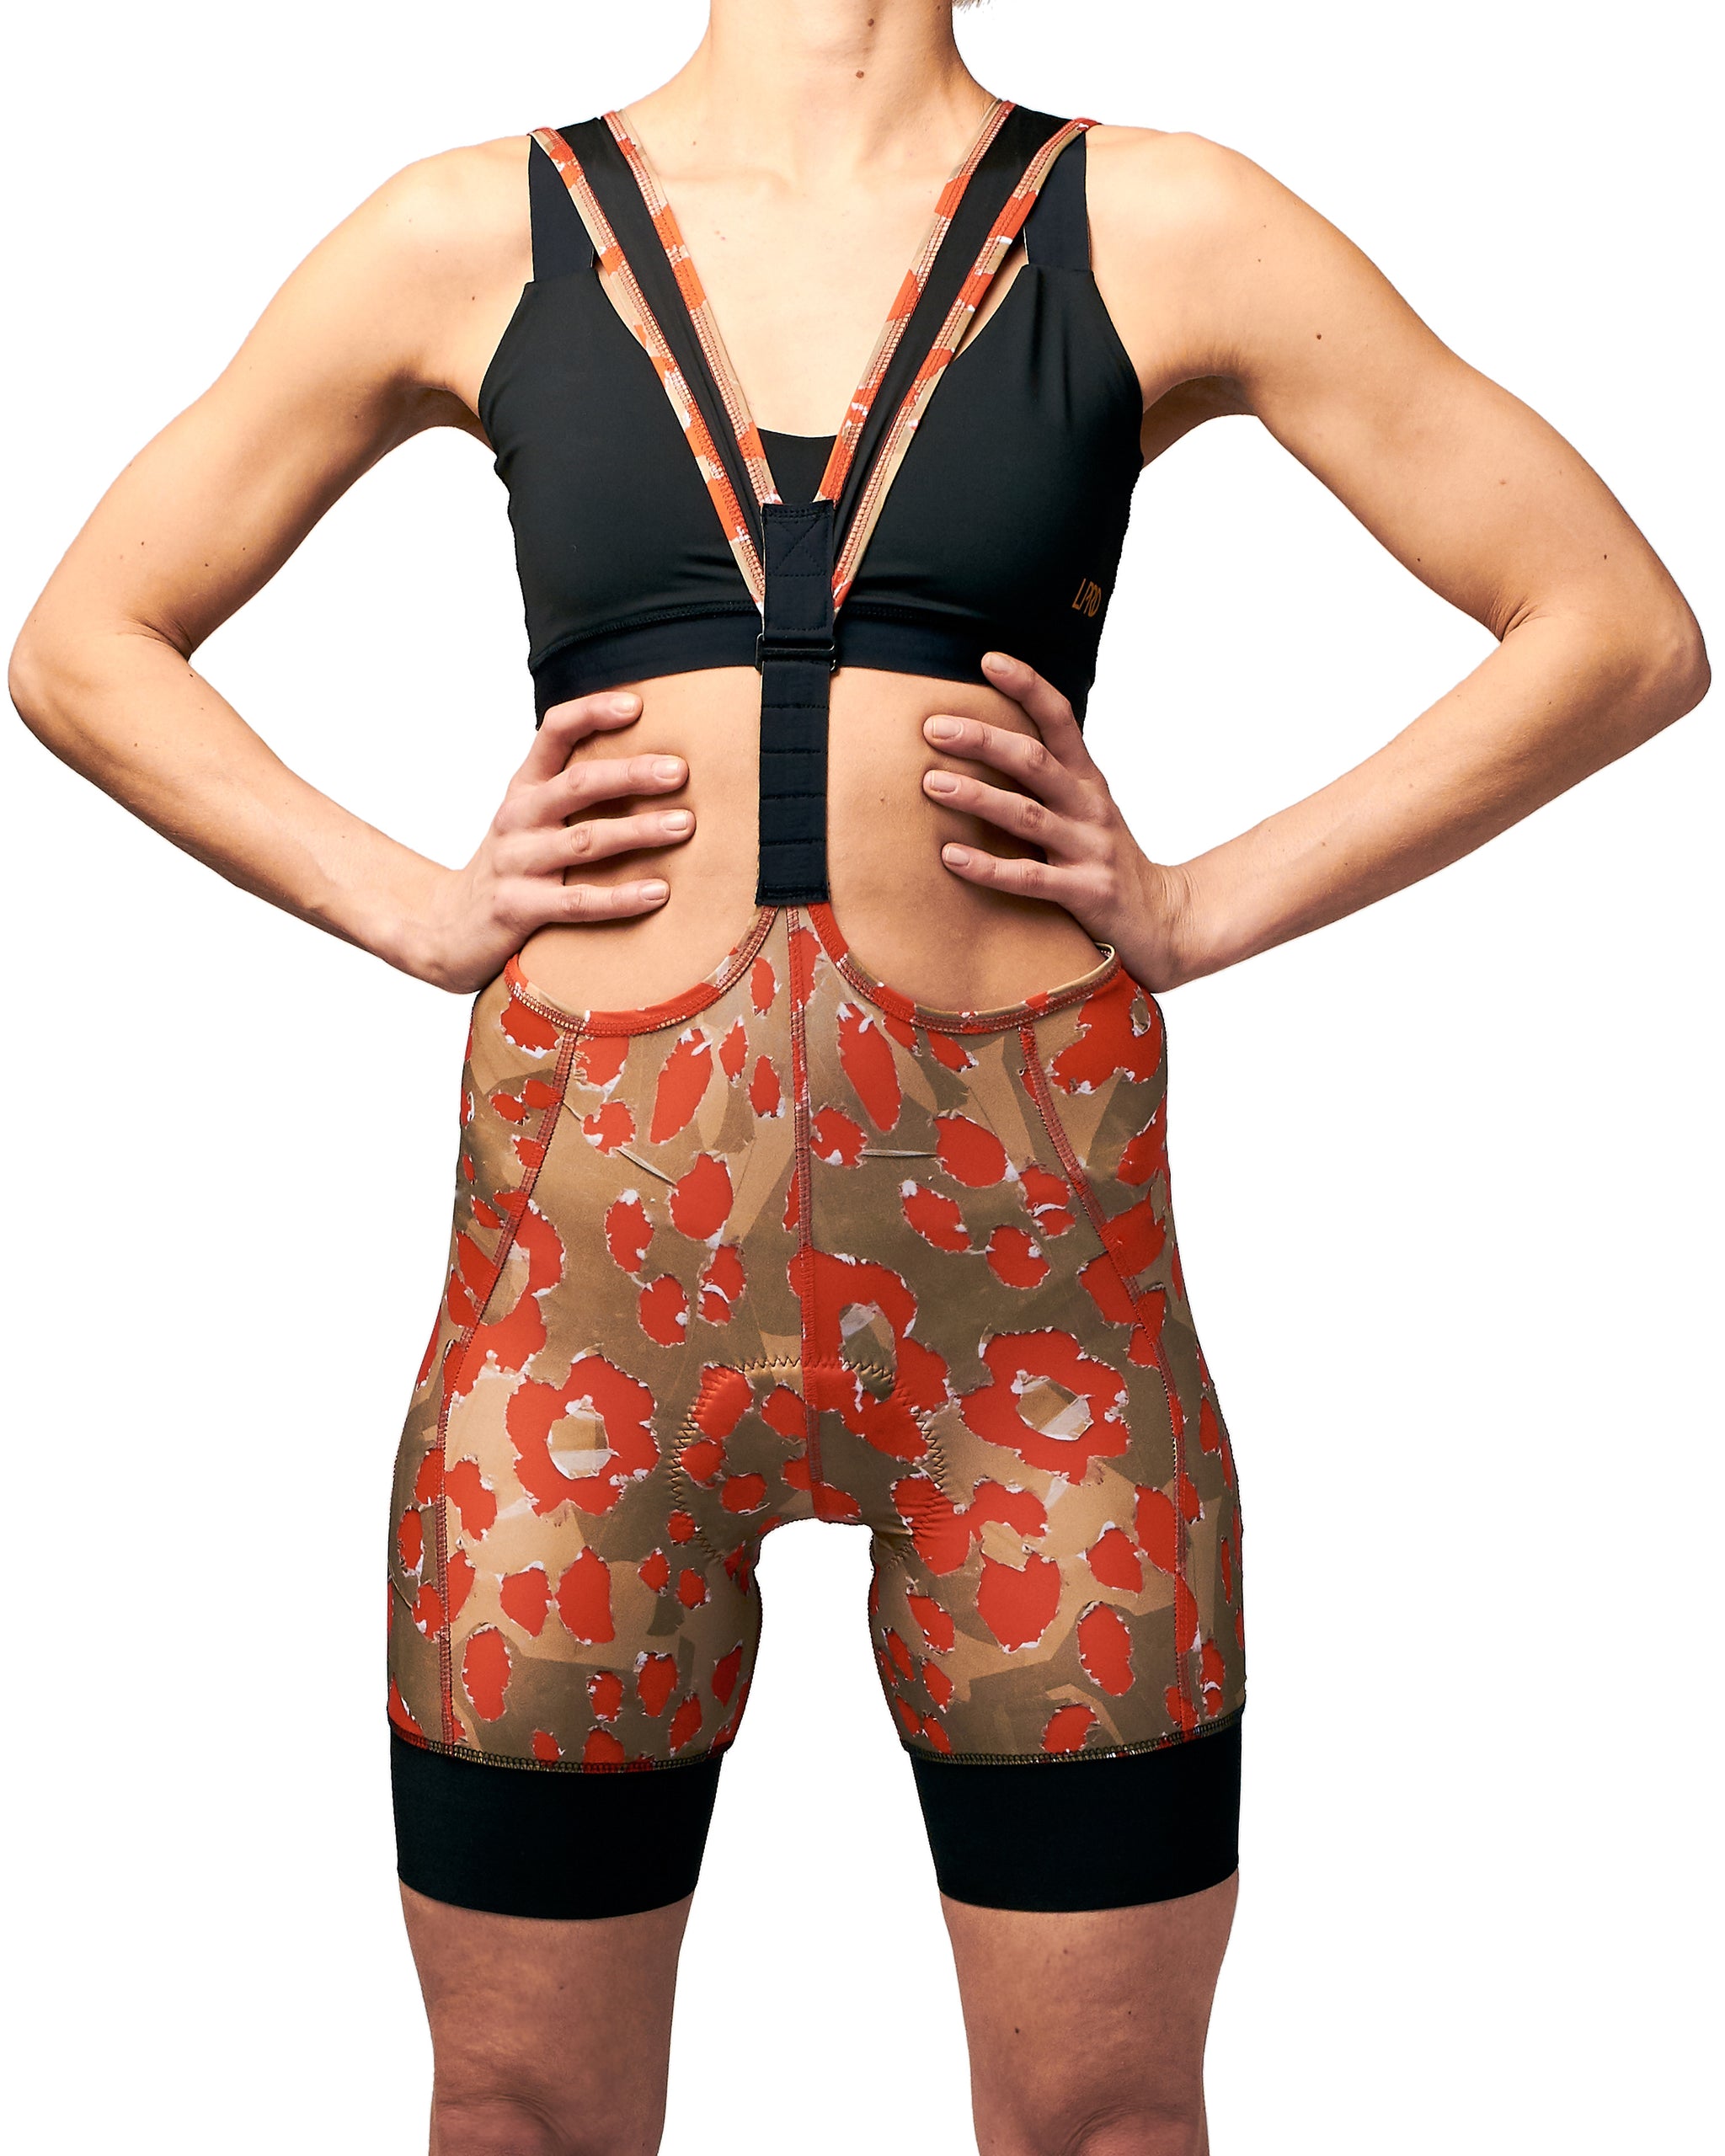 Download Women's bib shorts - Fuelling red and brown print with ...